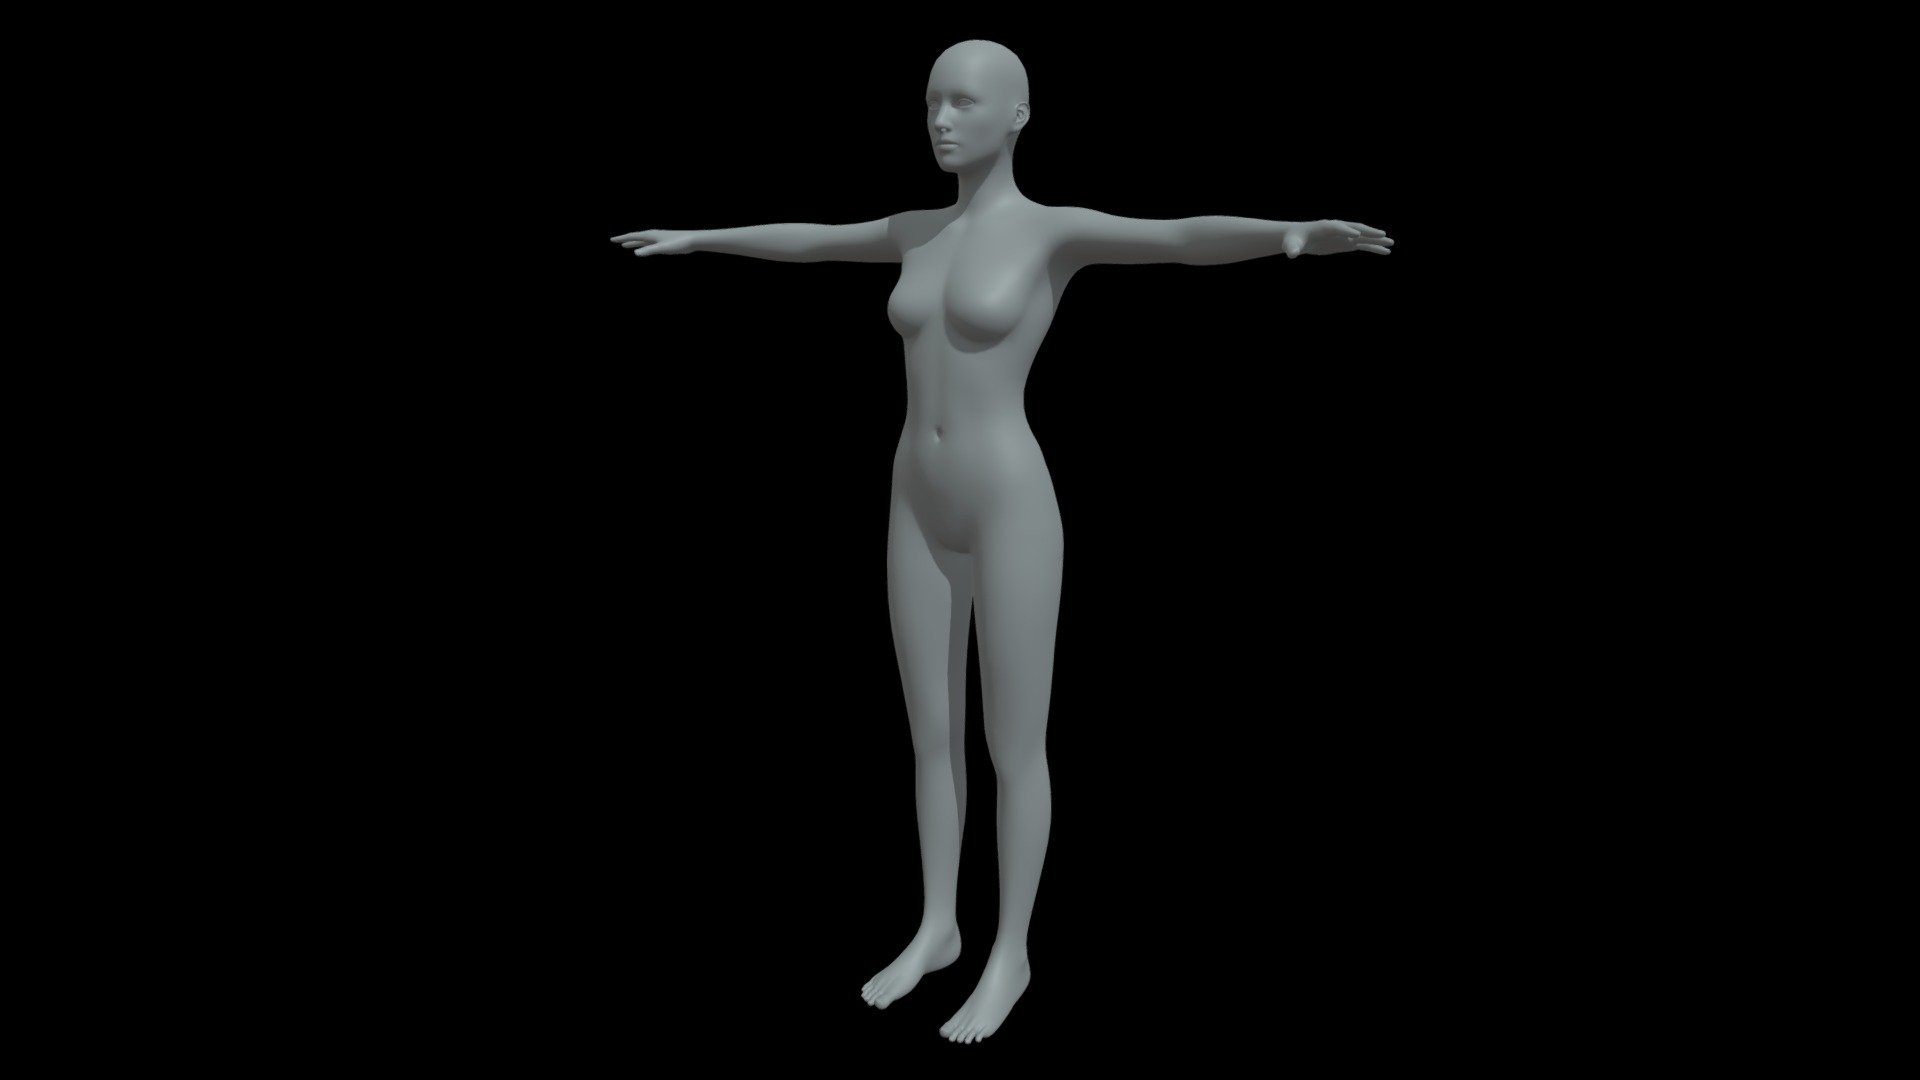 This model is a result of me retopologising, merging and slightly modifying three someone else's models together.
All of those models are CC4 attribution so there should not be any problems, but even if there is please contact me.

Credits to their work:

Base taken from: https://sketchfab.com/3d-models/scifi-animation-30ea70178d624b87a39553108db61bca

Legs taken from: https://sketchfab.com/3d-models/female-base-mesh-v1-aed2701290de43c3affad36458358b9c

Ears taken from: https://sketchfab.com/3d-models/10-15-19-female-chest-platewith-body-2f70ec18c4e44f4c9eb12cc54ffa9df0

Hope you found the model helpful! - Female base mesh - Download Free 3D model by Drazen (@drazenk) 3d model